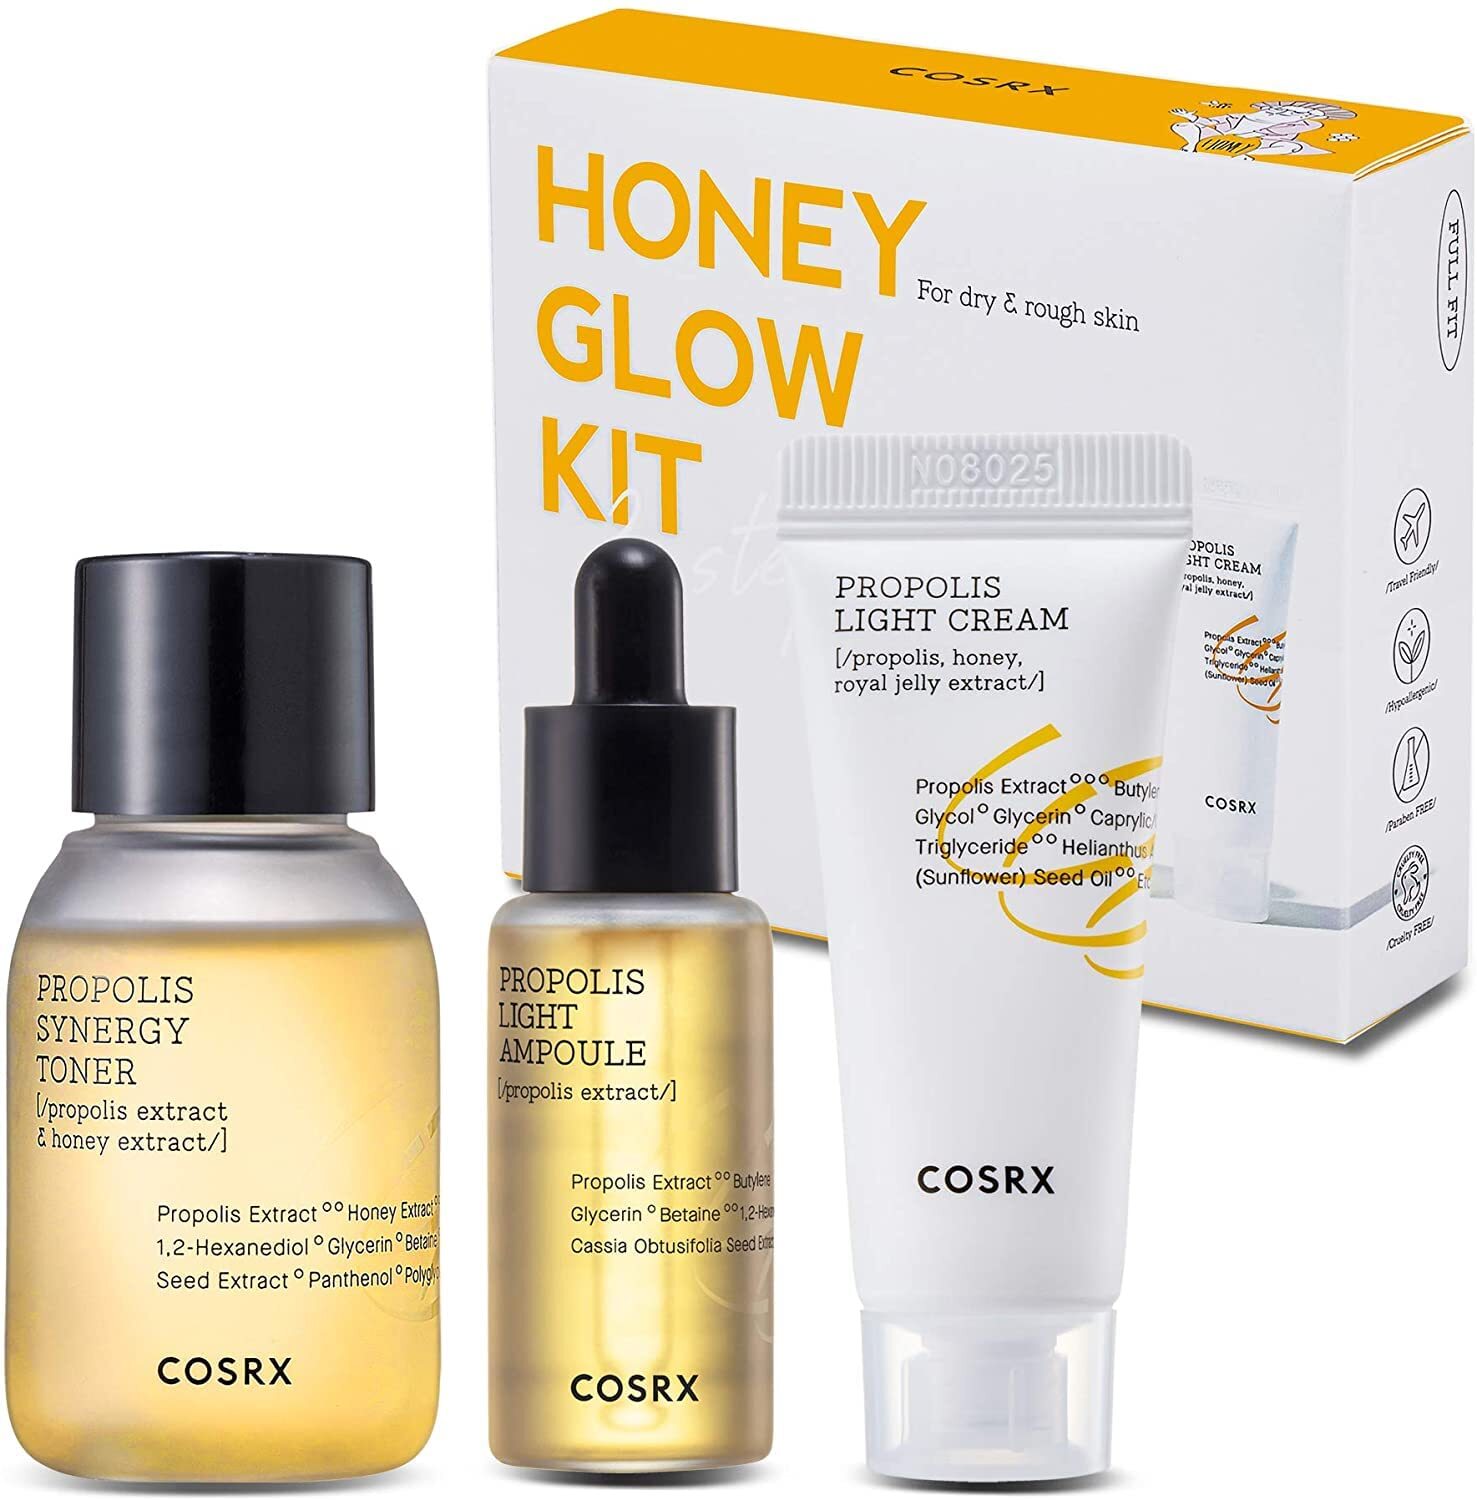 Cosrx Cica 7 Honey glow kit for dry and rough skin, фото 1